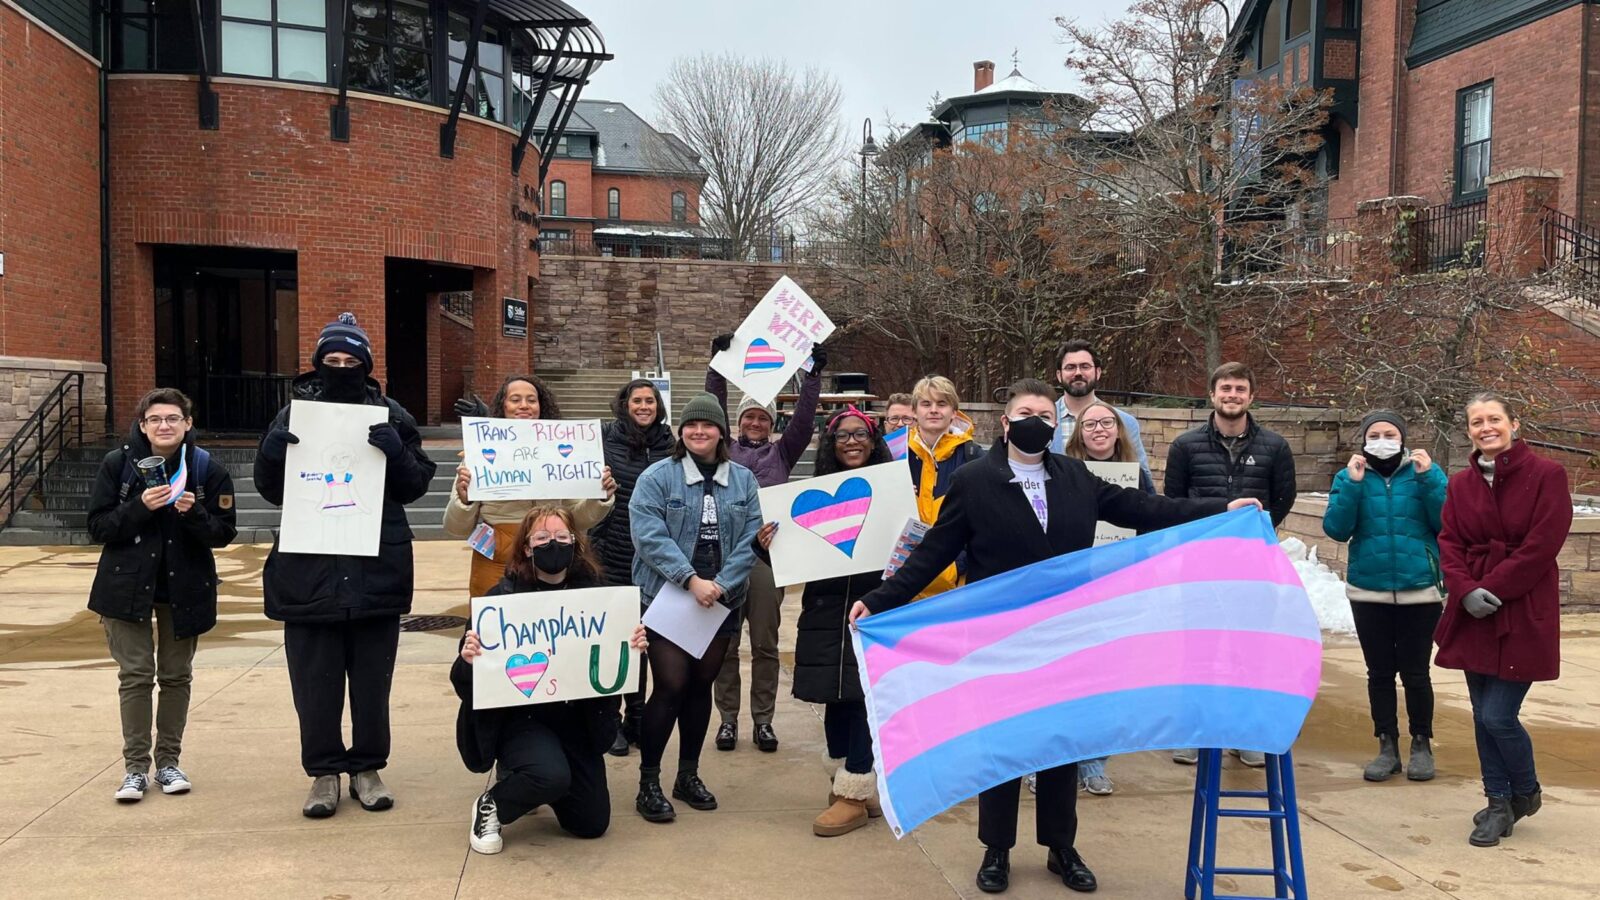 Snowy trans day of remembrance student group posing with signs and flags in the courtyard